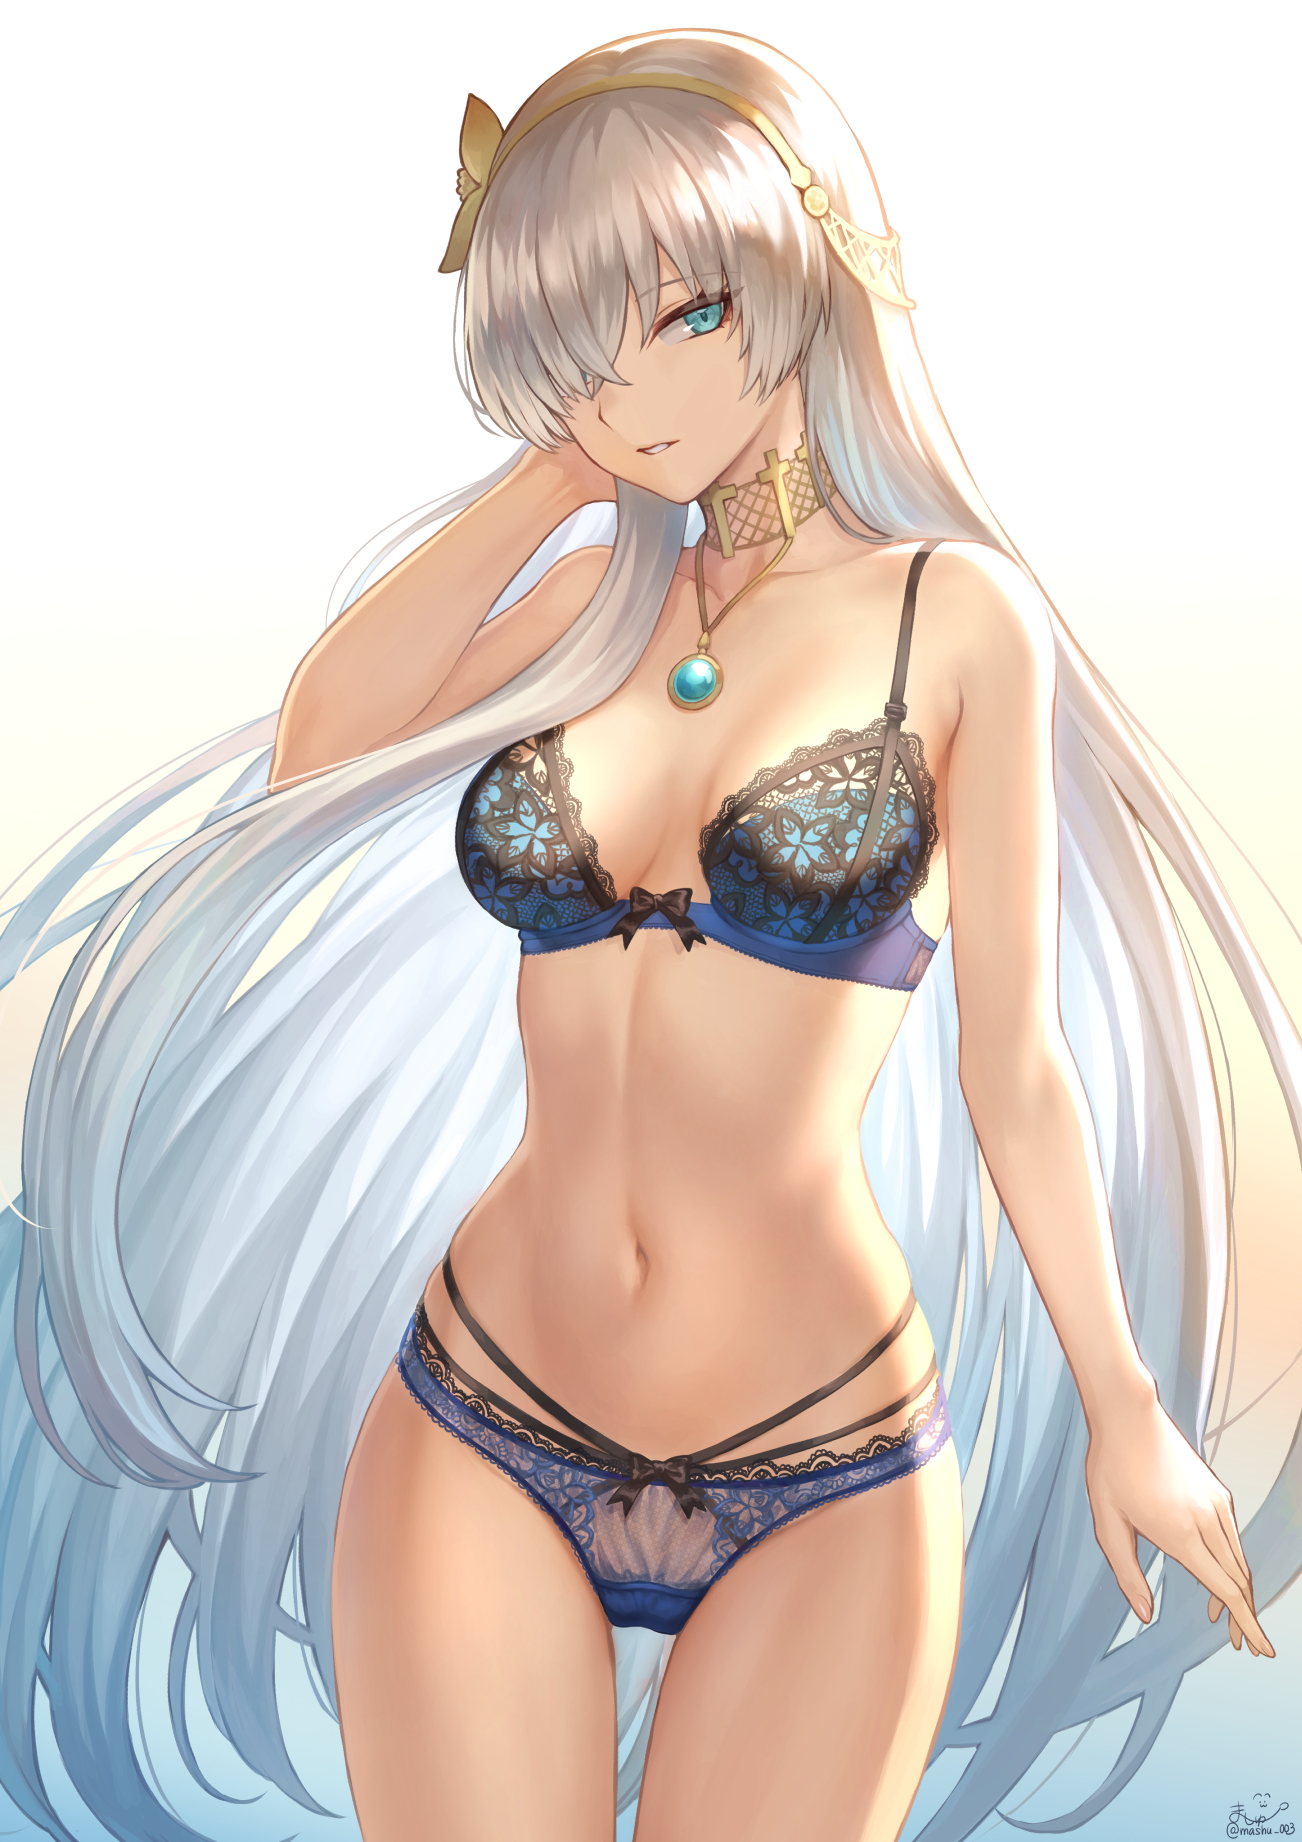 Sexy girls of anime posing in hot lingerie and stockings image photo